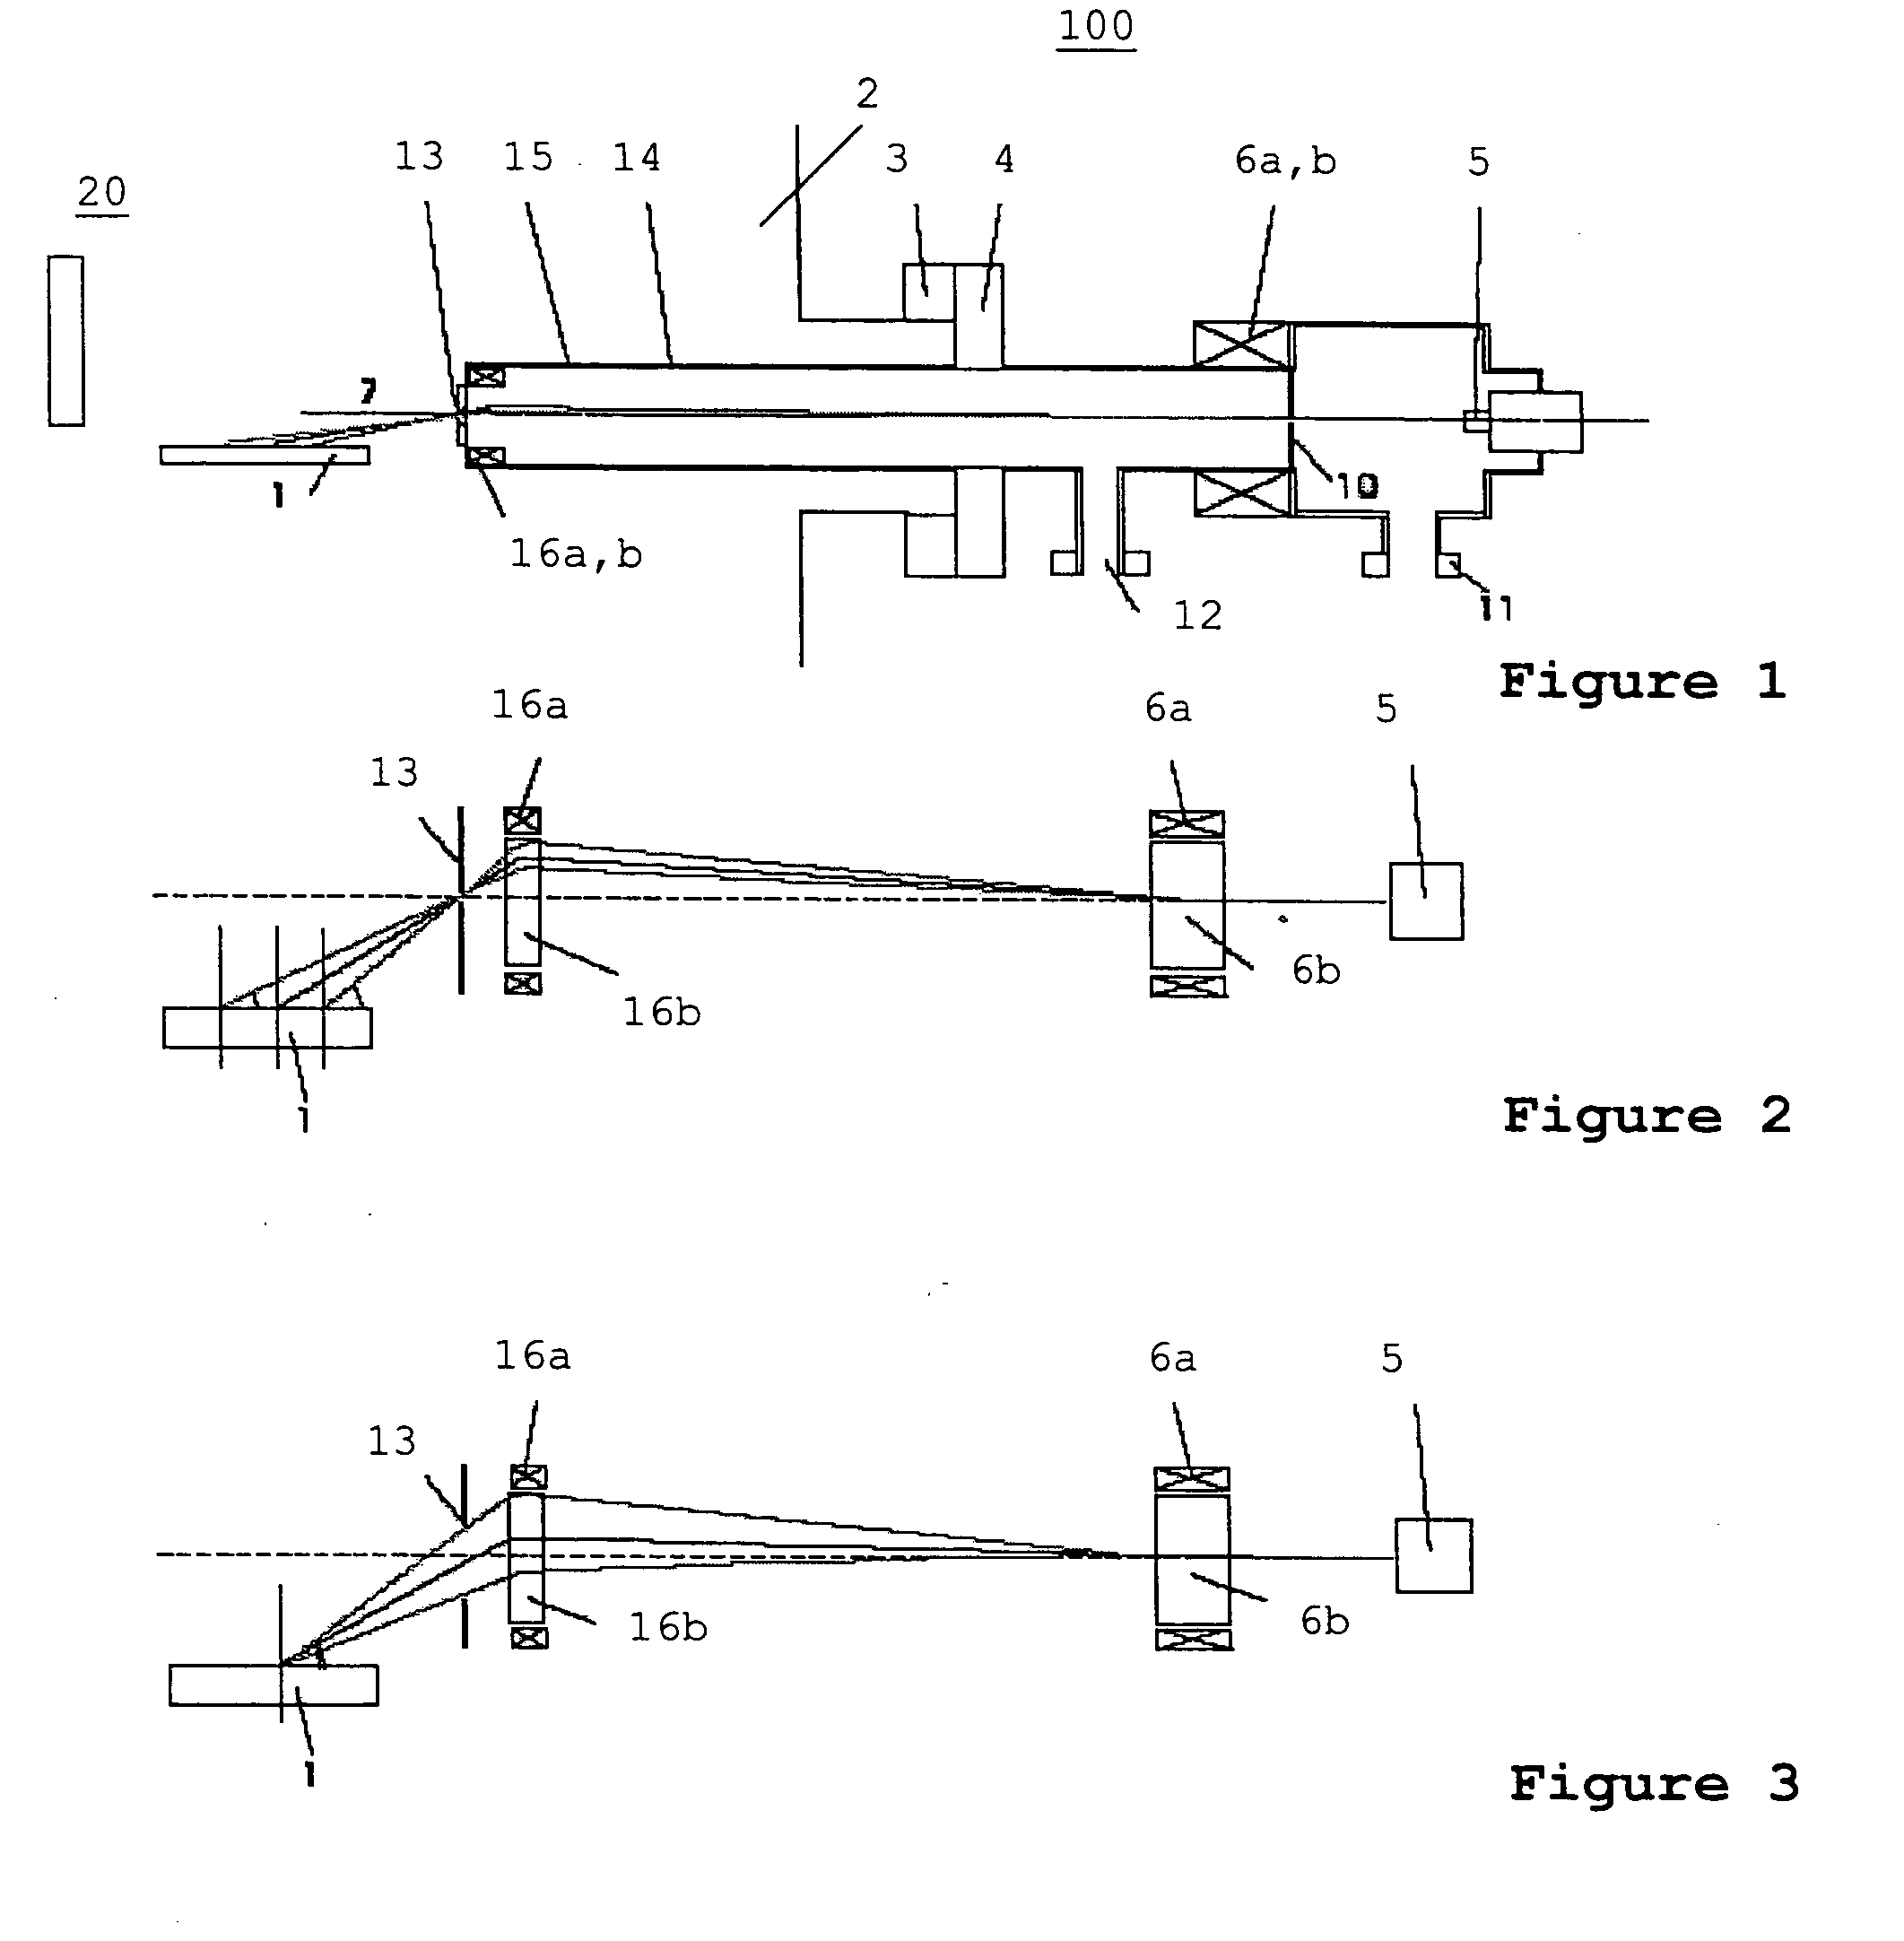 Electron diffraction system for use in production environment and for high pressure deposition techniques